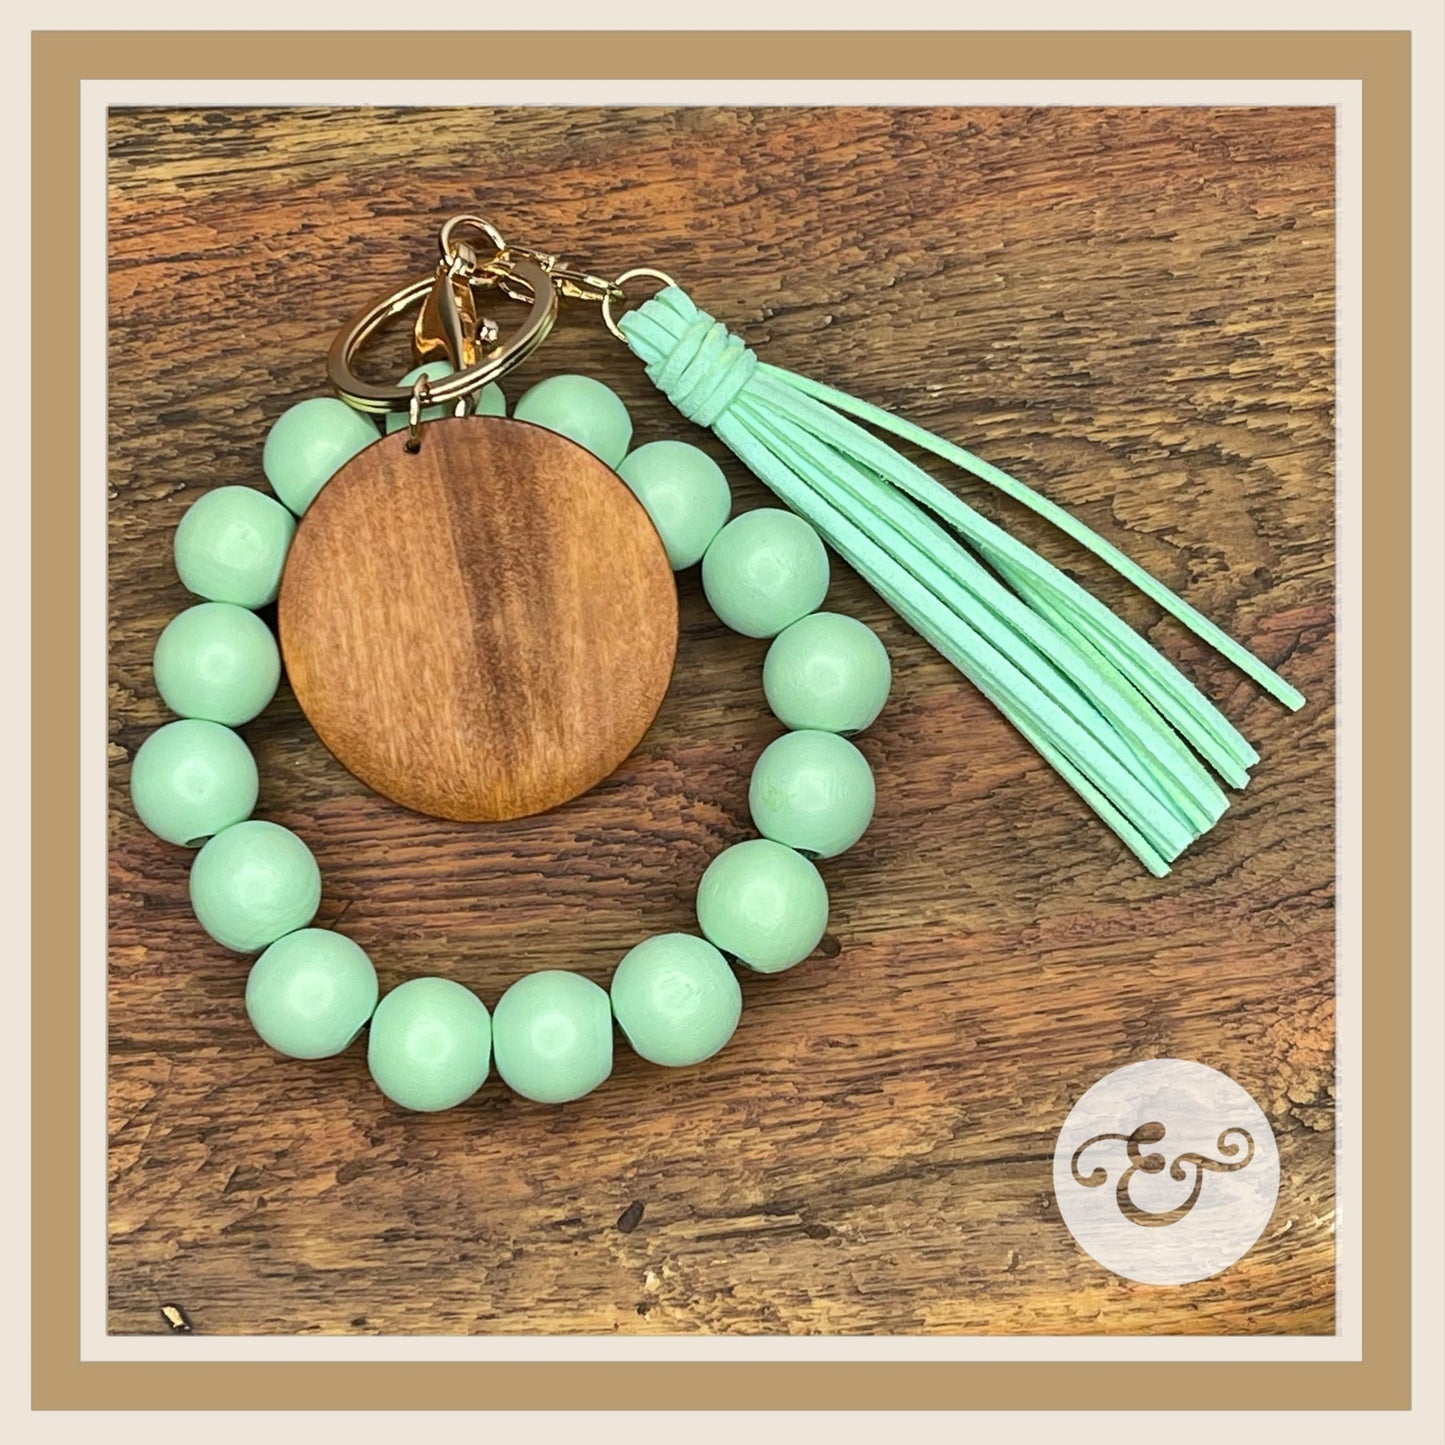 Wooden Bead Wristlets With Suede Tassel (6688691257422) (6688719405134) (6688894517326) (6688895270990) (6688896057422) (6688897171534) (6688898613326)